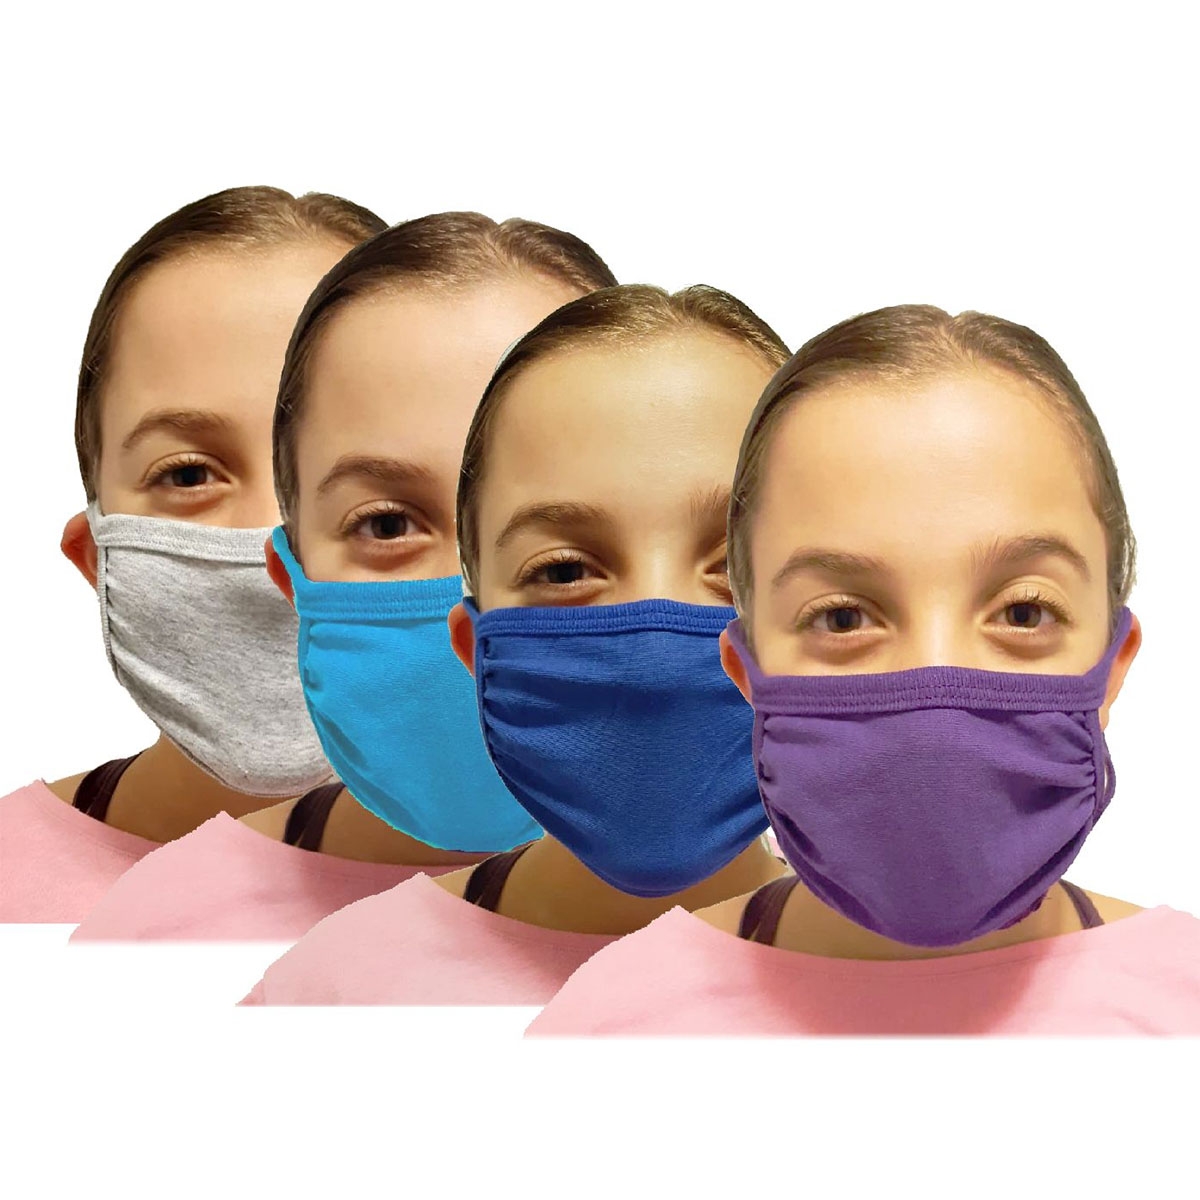 Set of Four Unisex Reusable Double-Layered Face Masks For Children (Variety of Colors) - 1